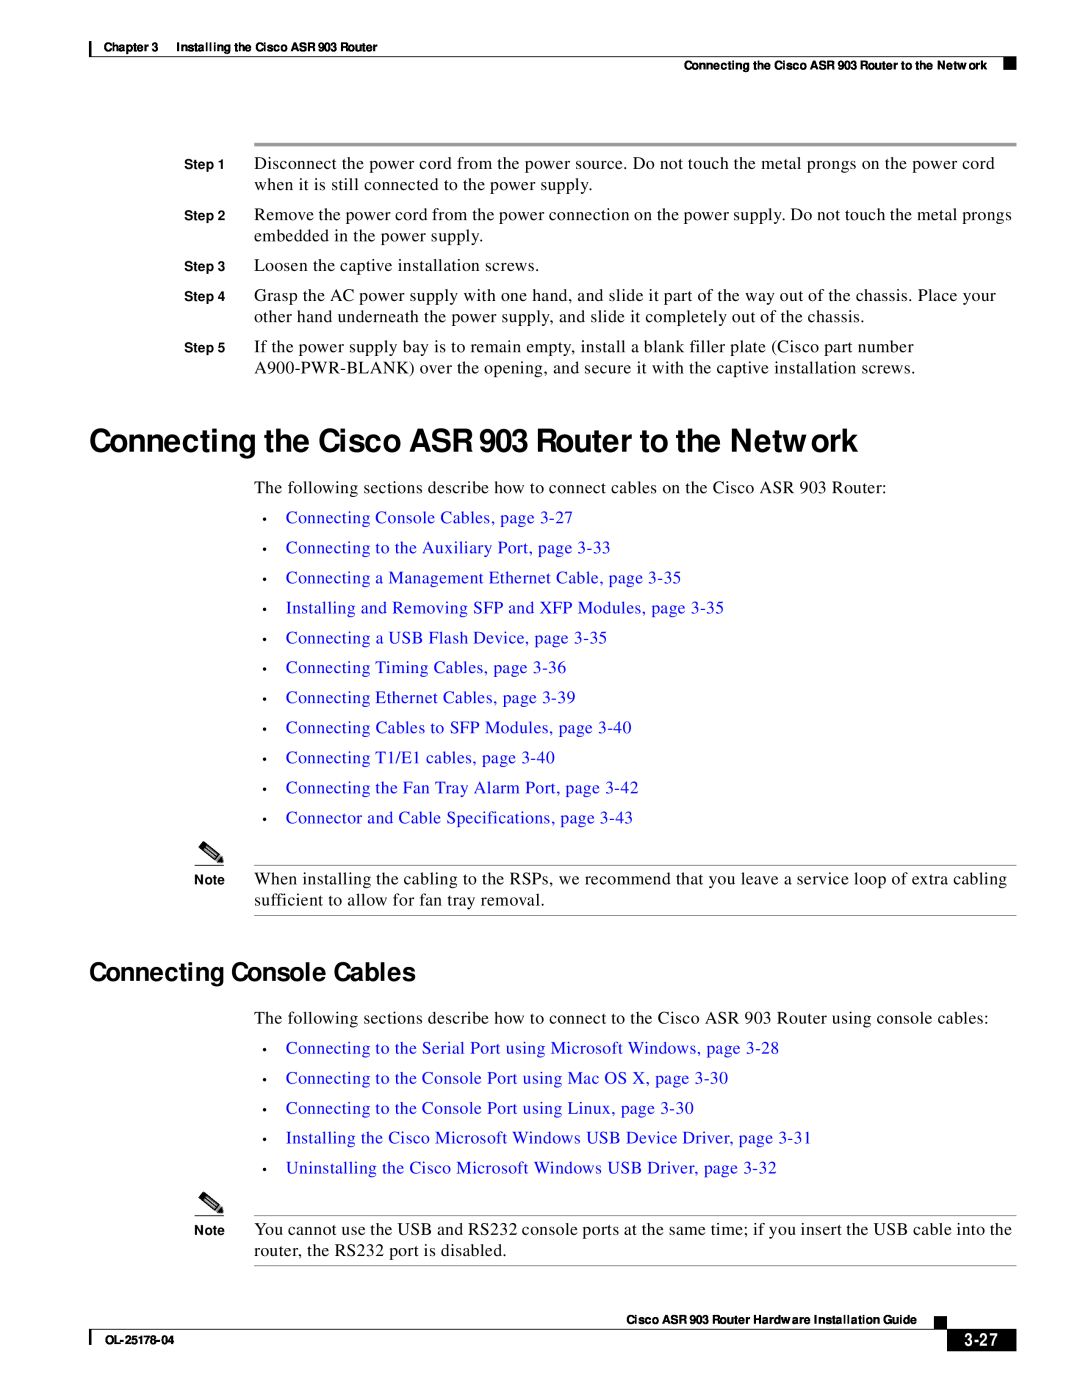 Cisco Systems manual Connecting the Cisco ASR 903 Router to the Network, Connecting Console Cables, 3-27 